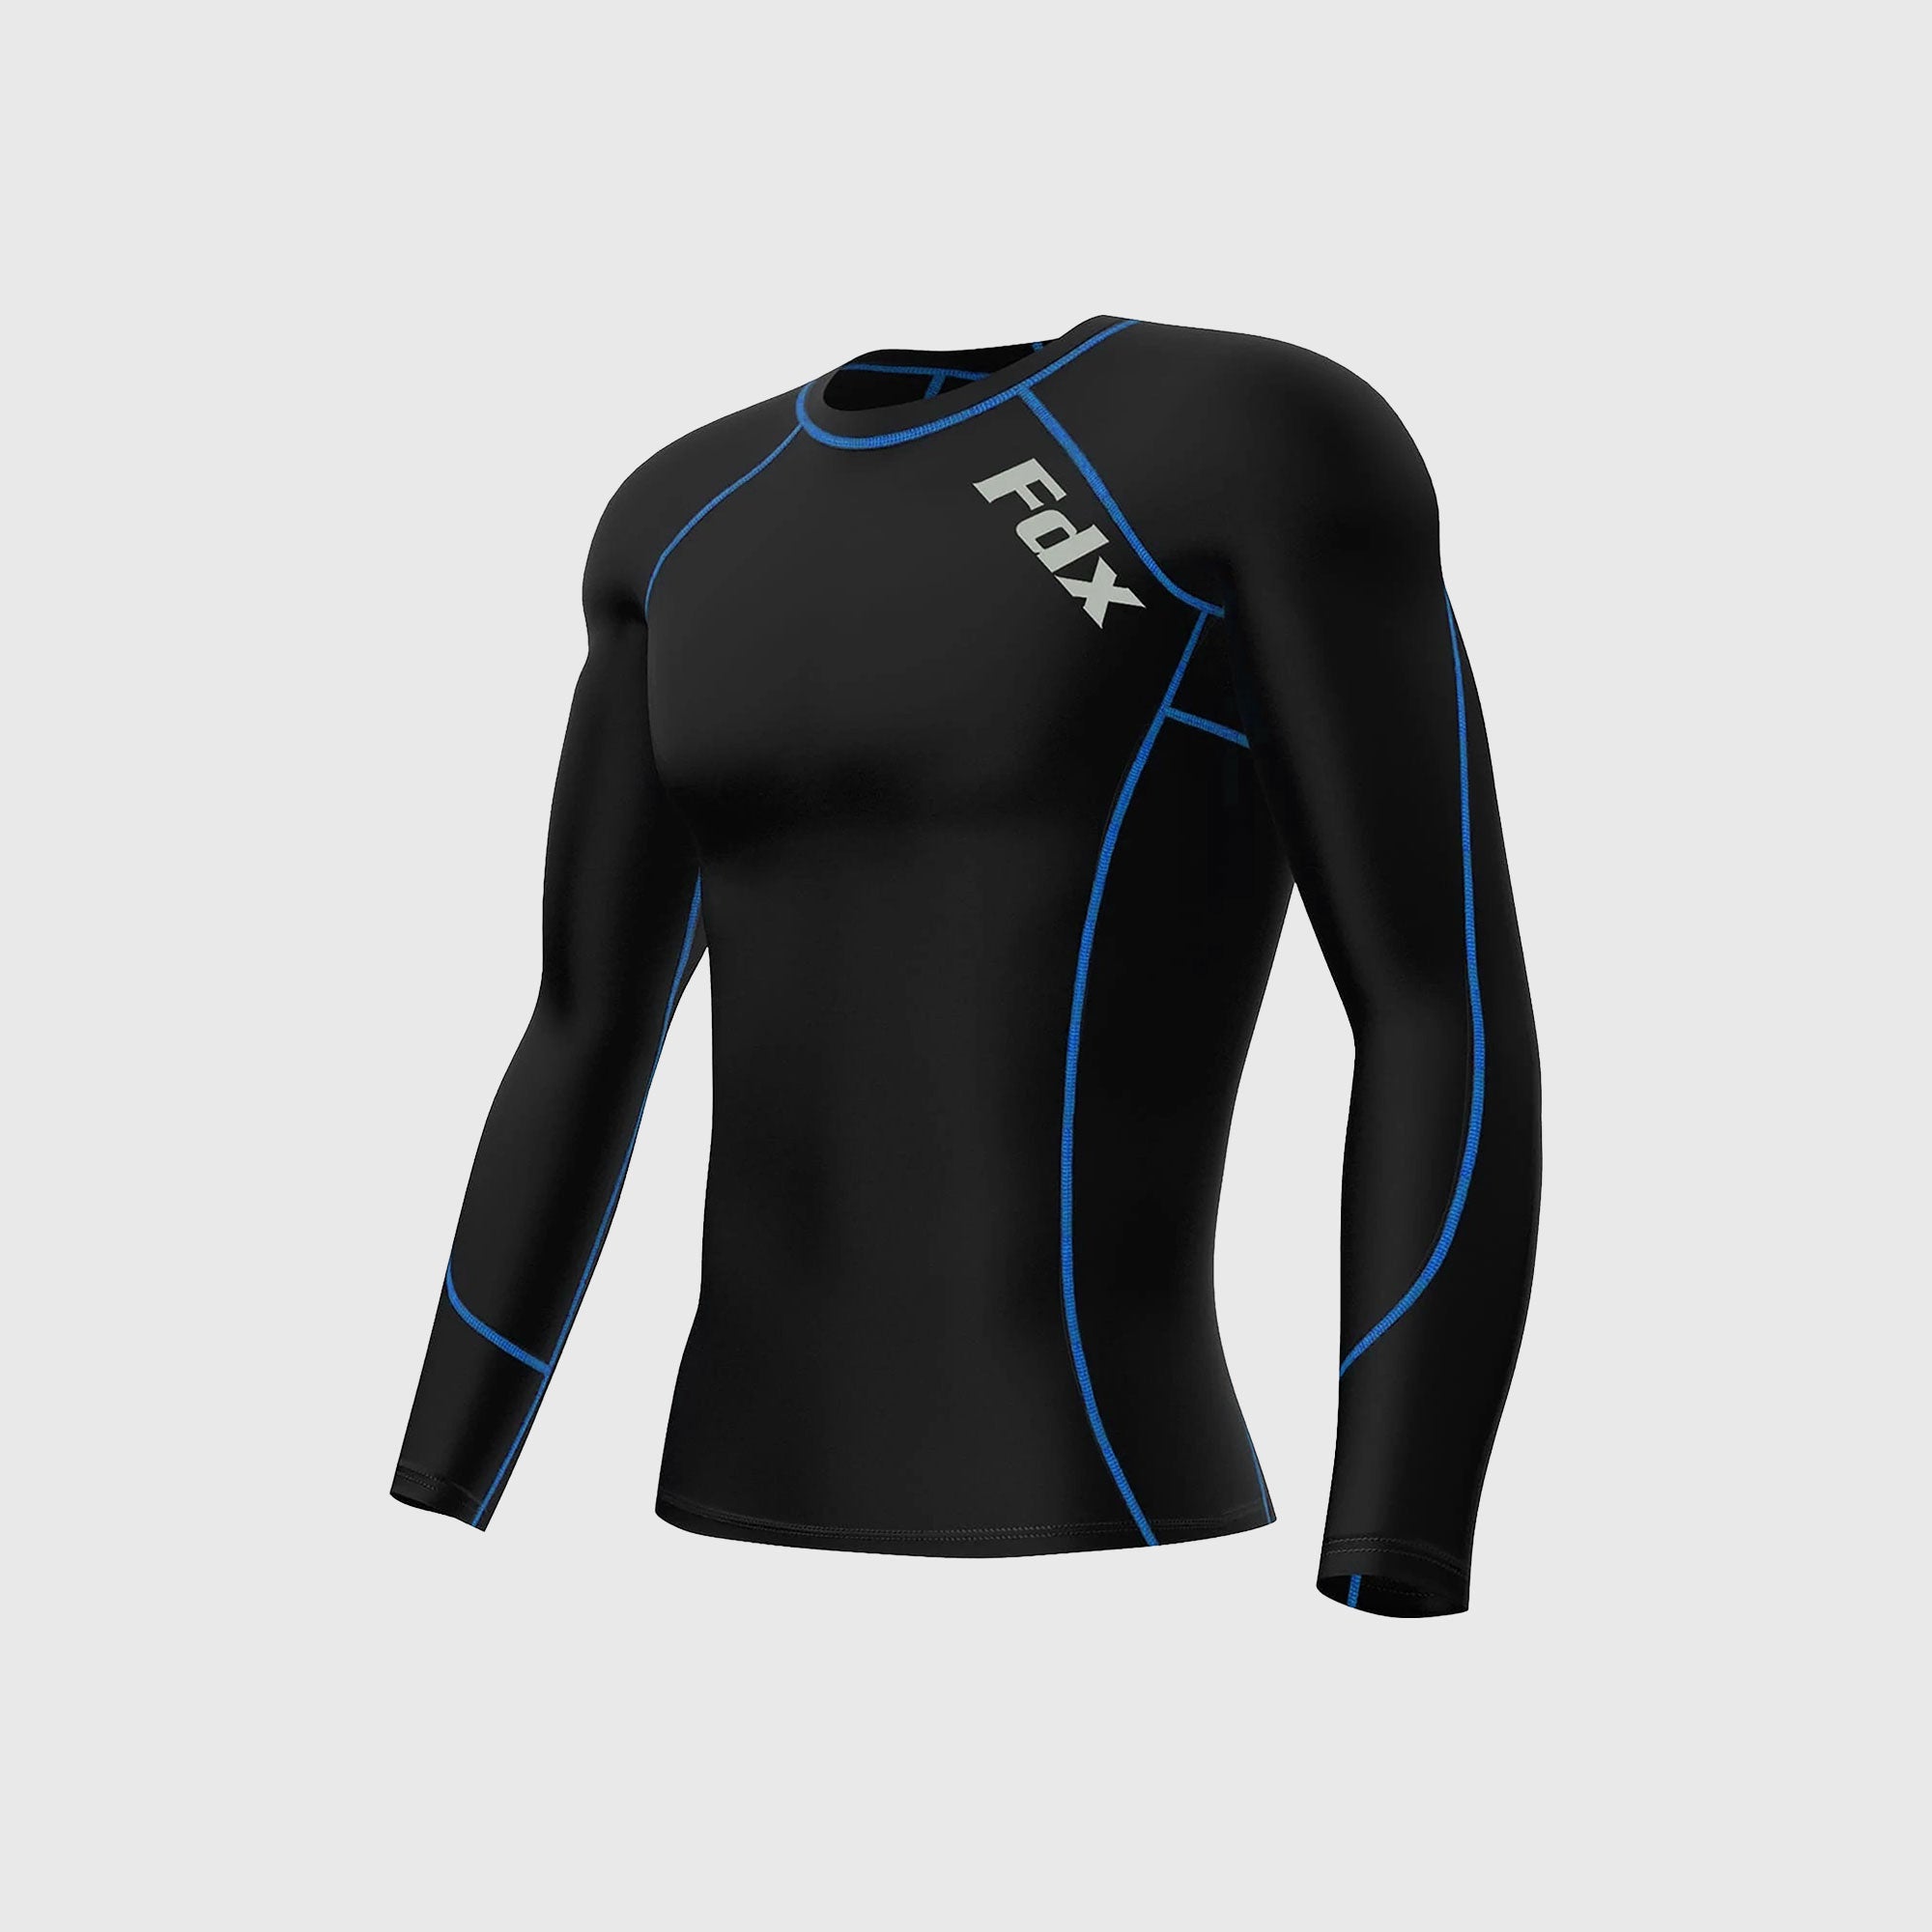 Fdx Men's Black & Blue Long Sleeve Compression Top Running Gym Workout Wear Rash Guard Stretchable Breathable - Thermolinx